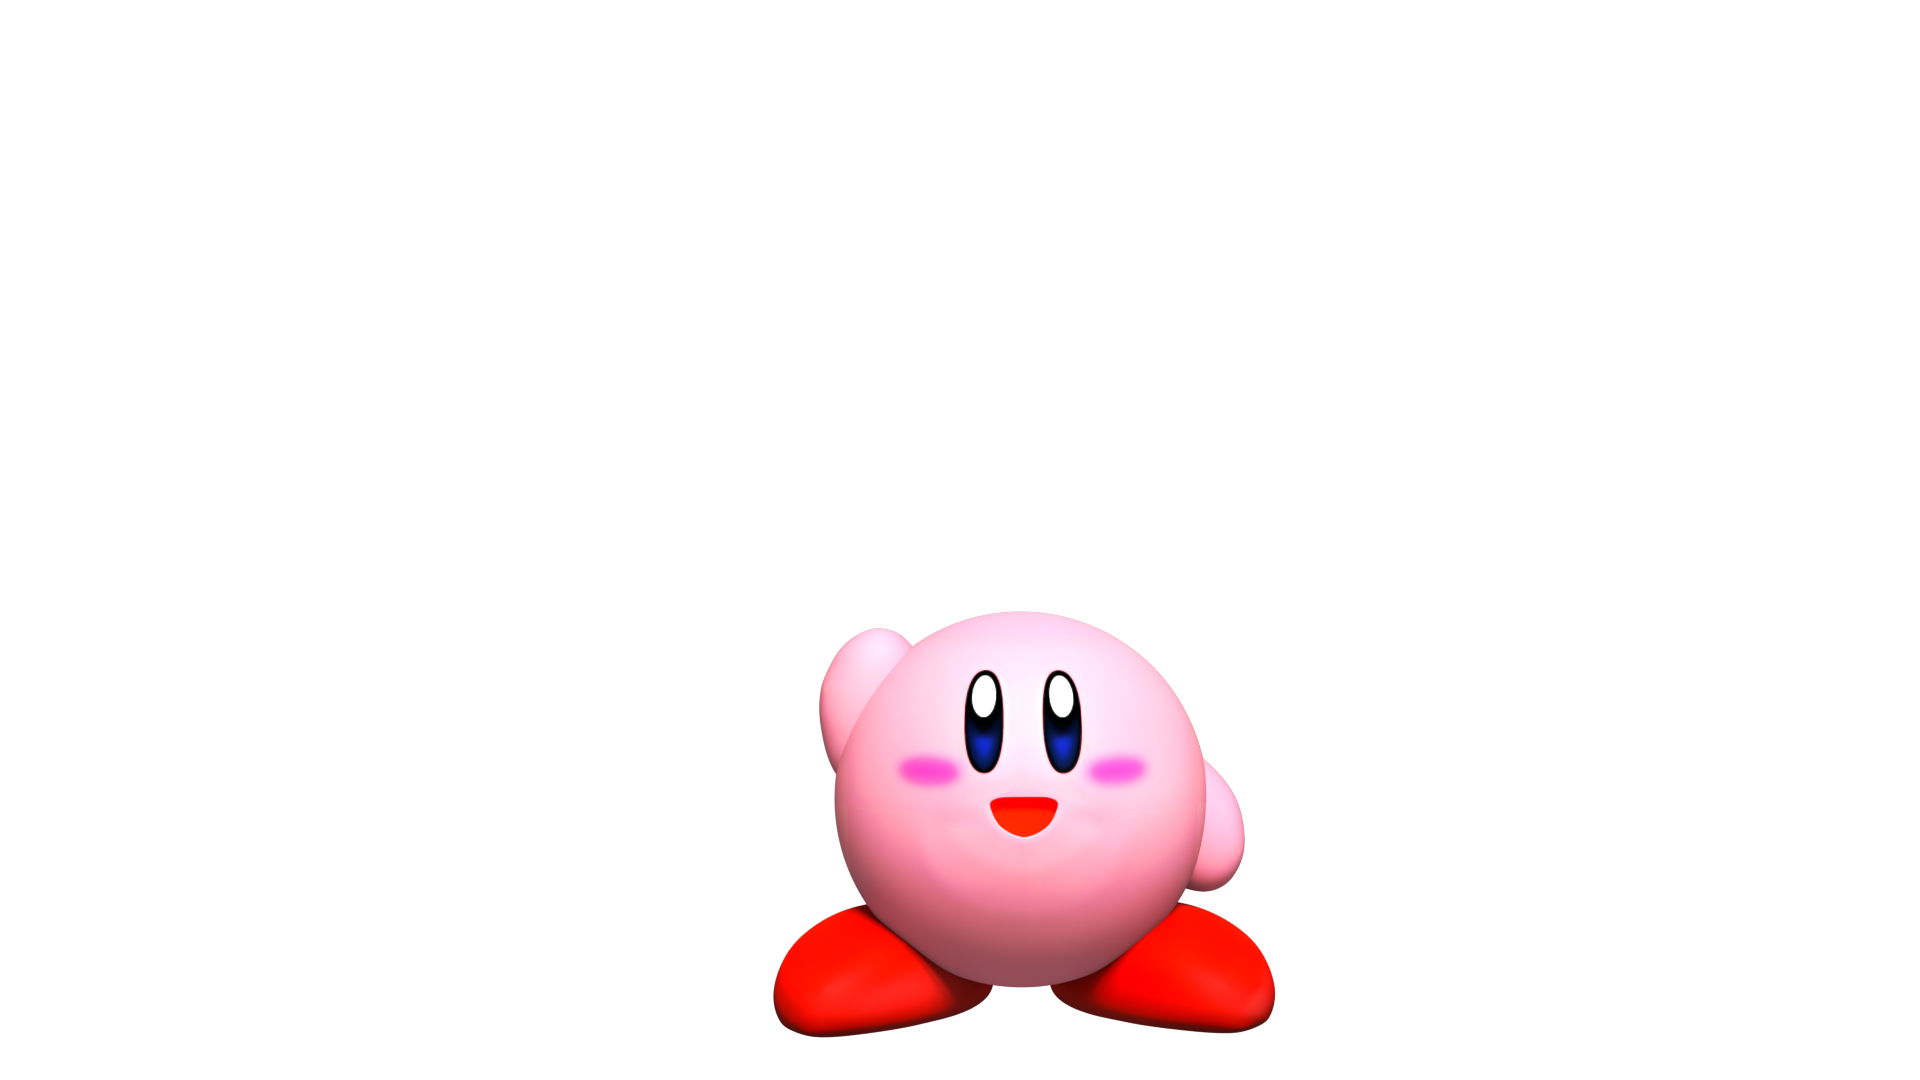 HDHDHD by kirby6119 on DeviantArt